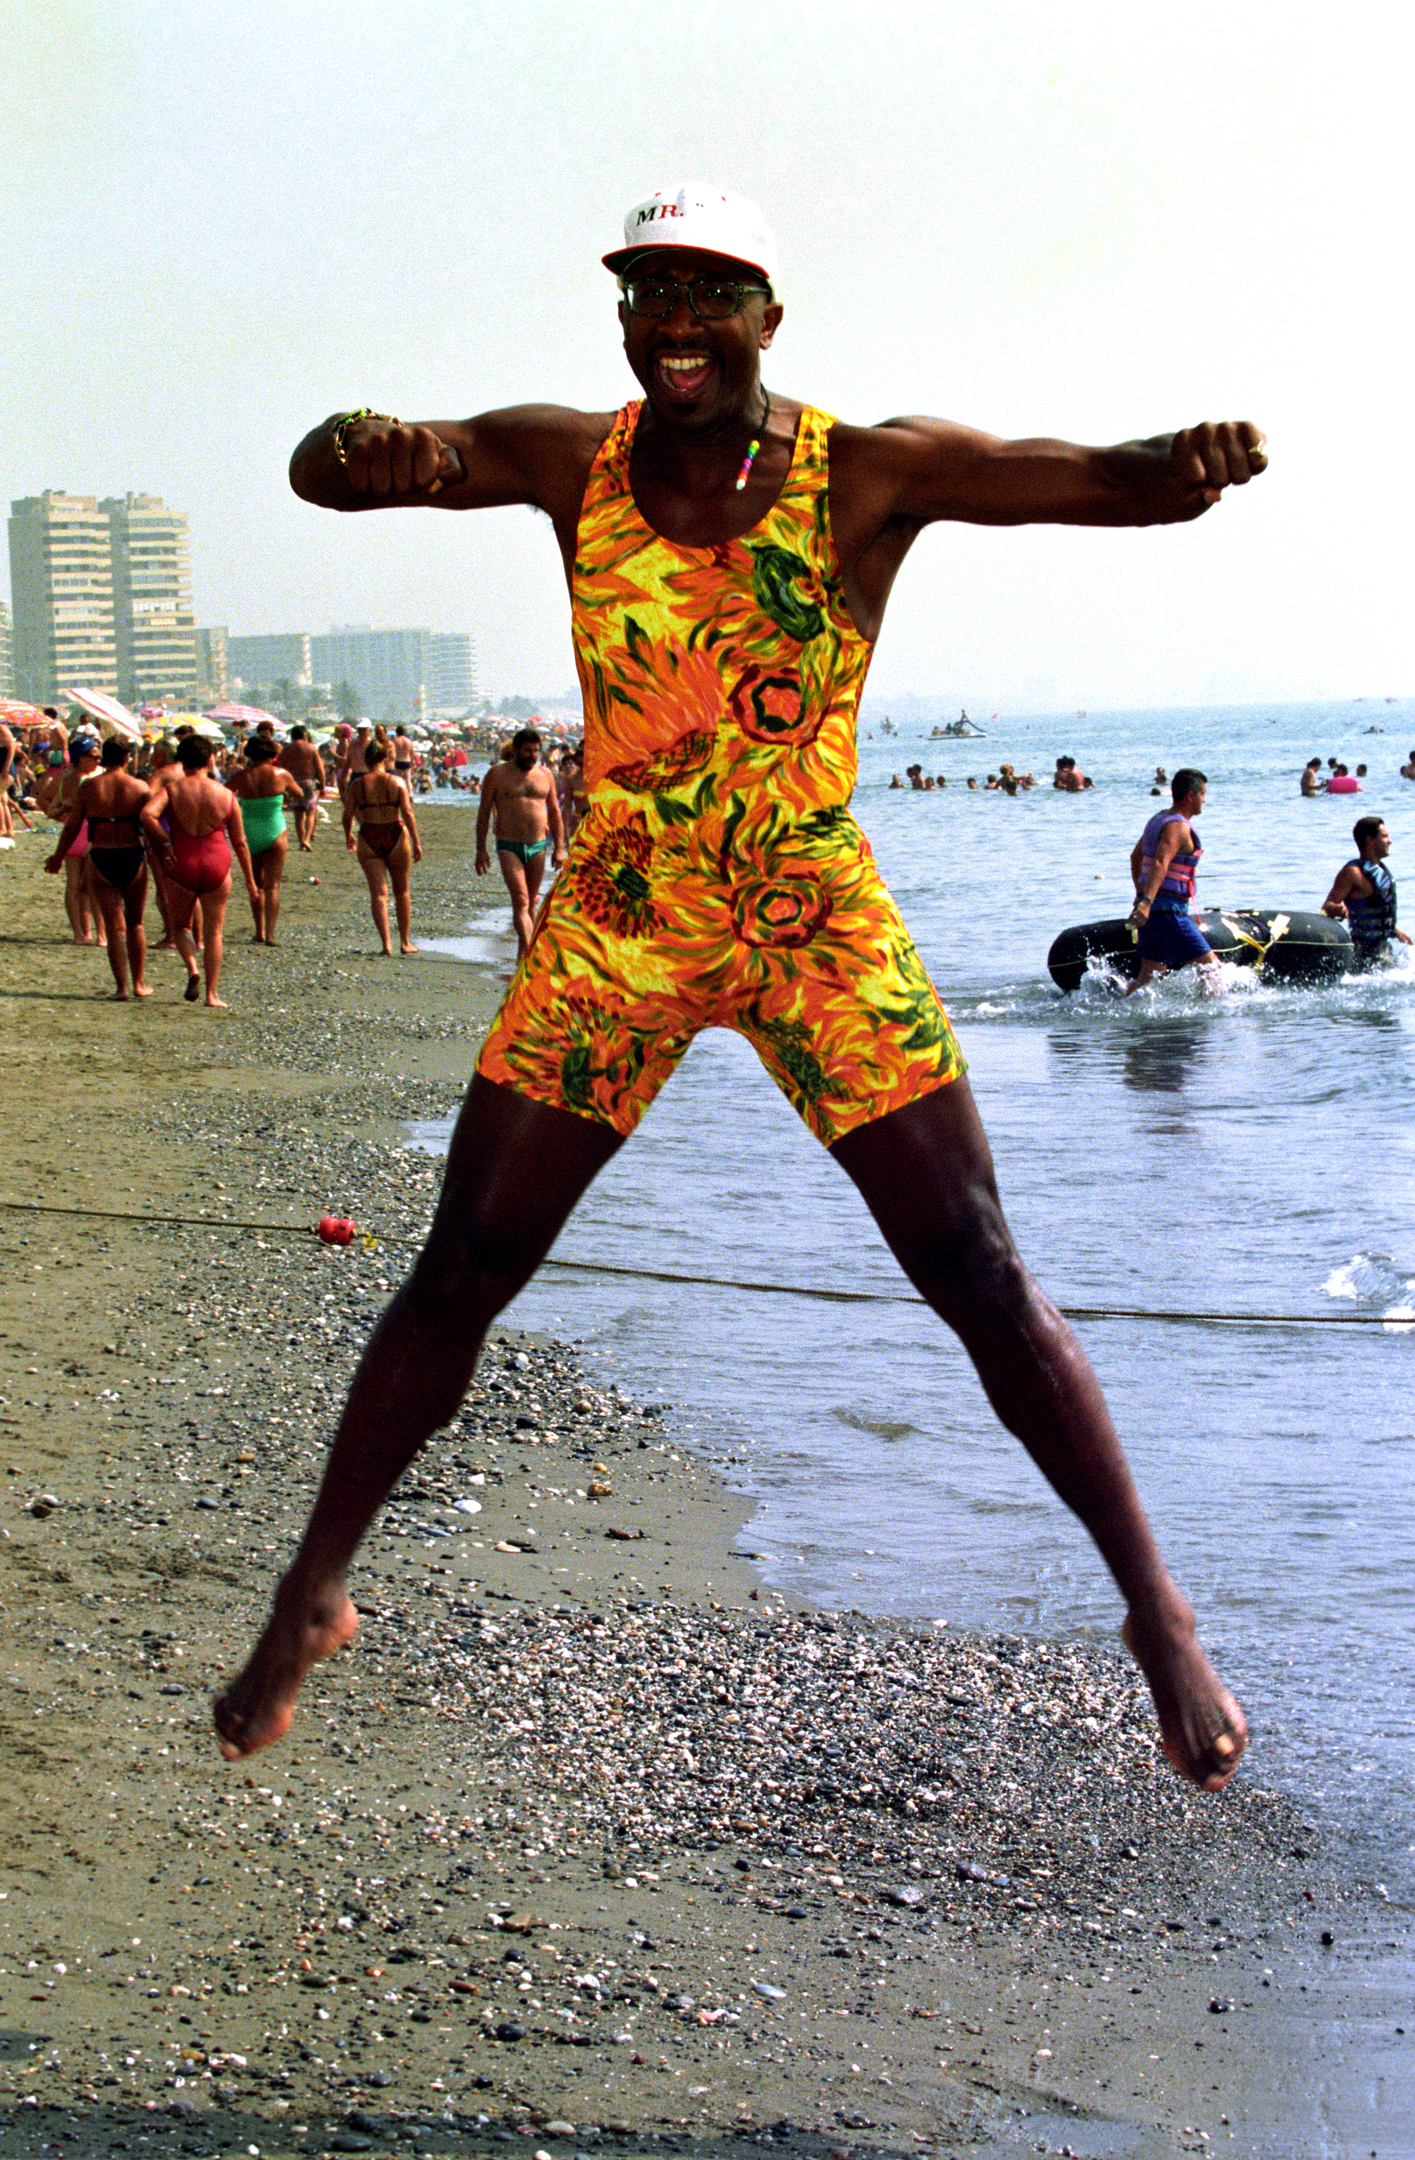 Keeping fit should be positive, not painful, says Mr Motivator - The